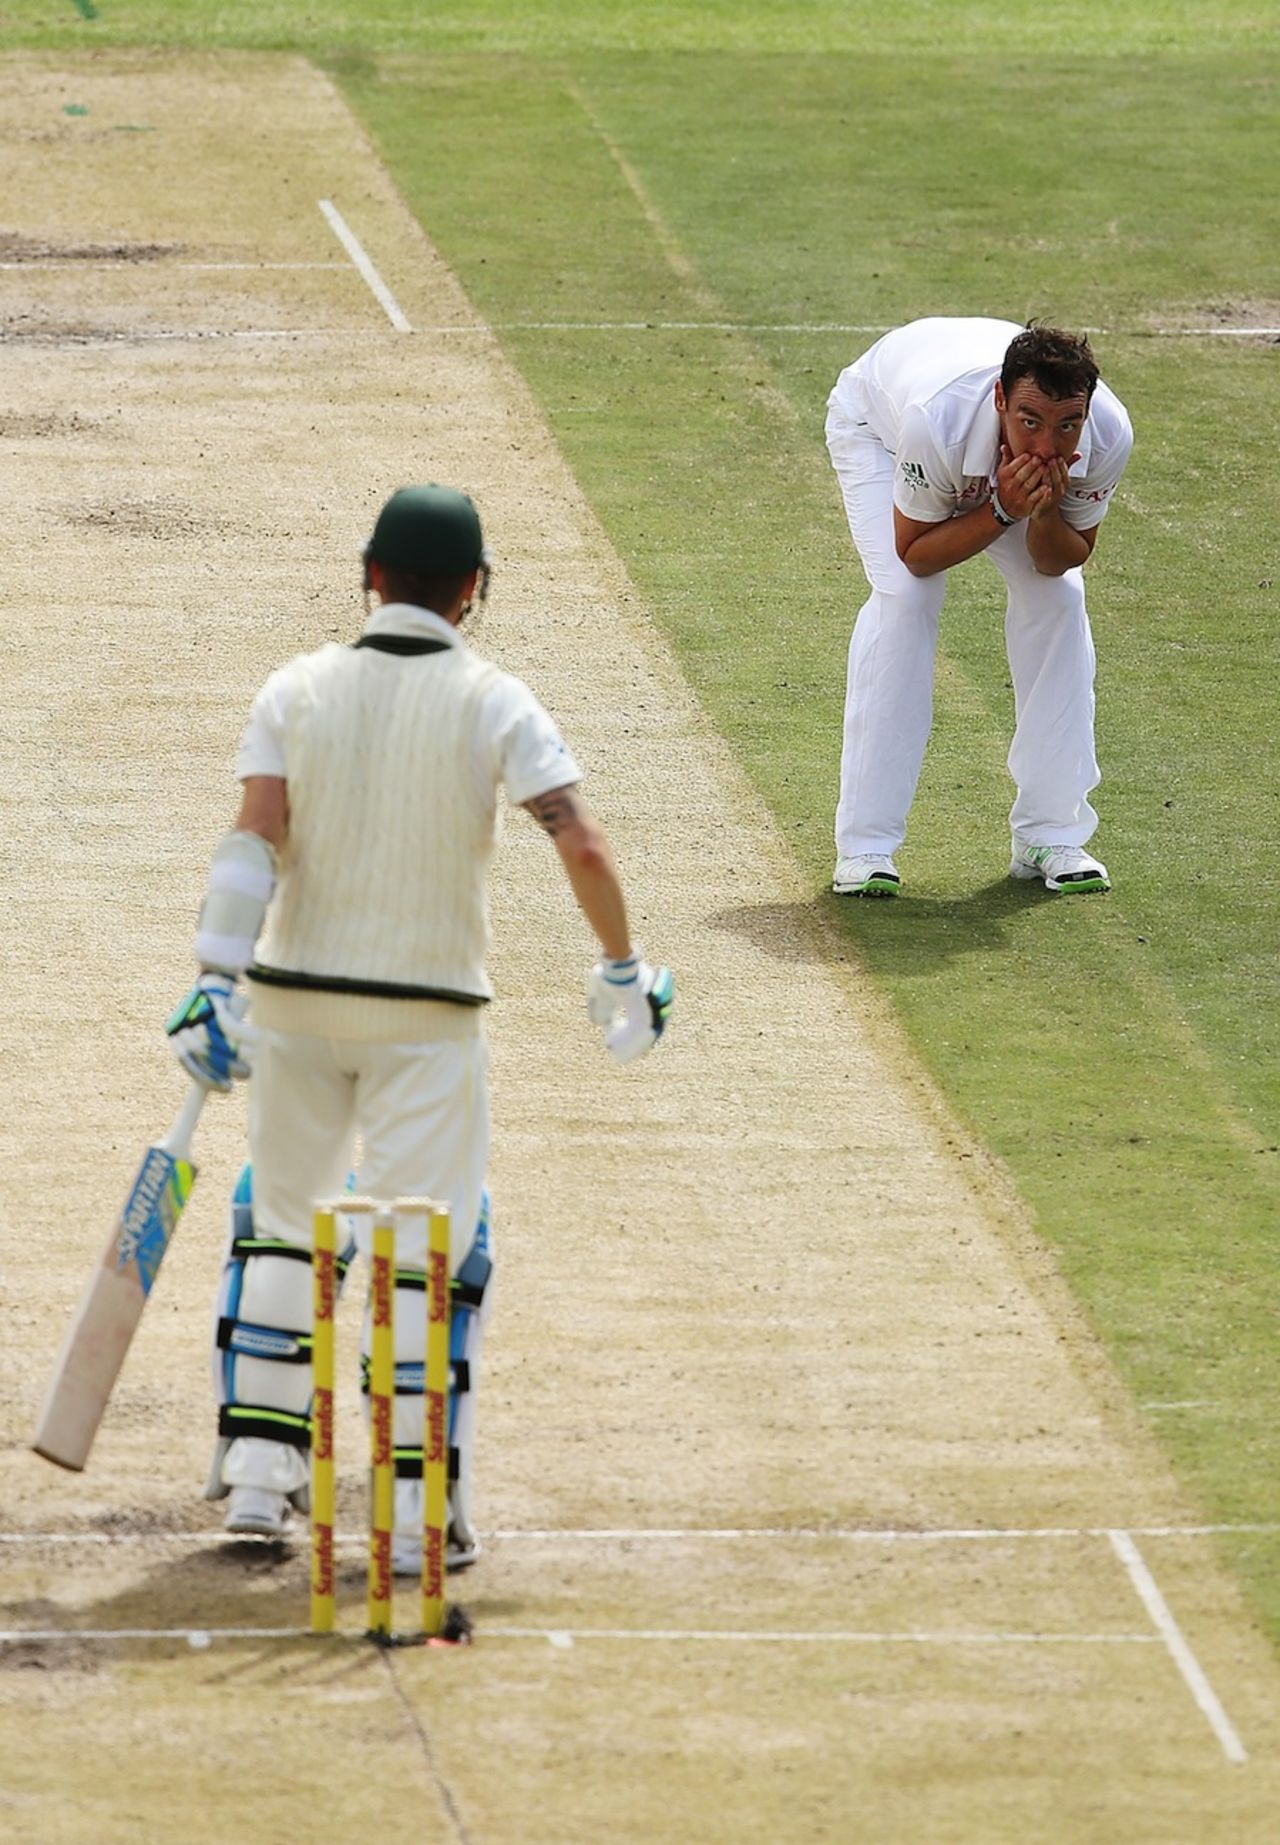 Kyle Abbott nearly had Michael Clarke out on 99, South Africa v Australia, 3rd Test, Cape Town, 2nd day, March 2, 2014